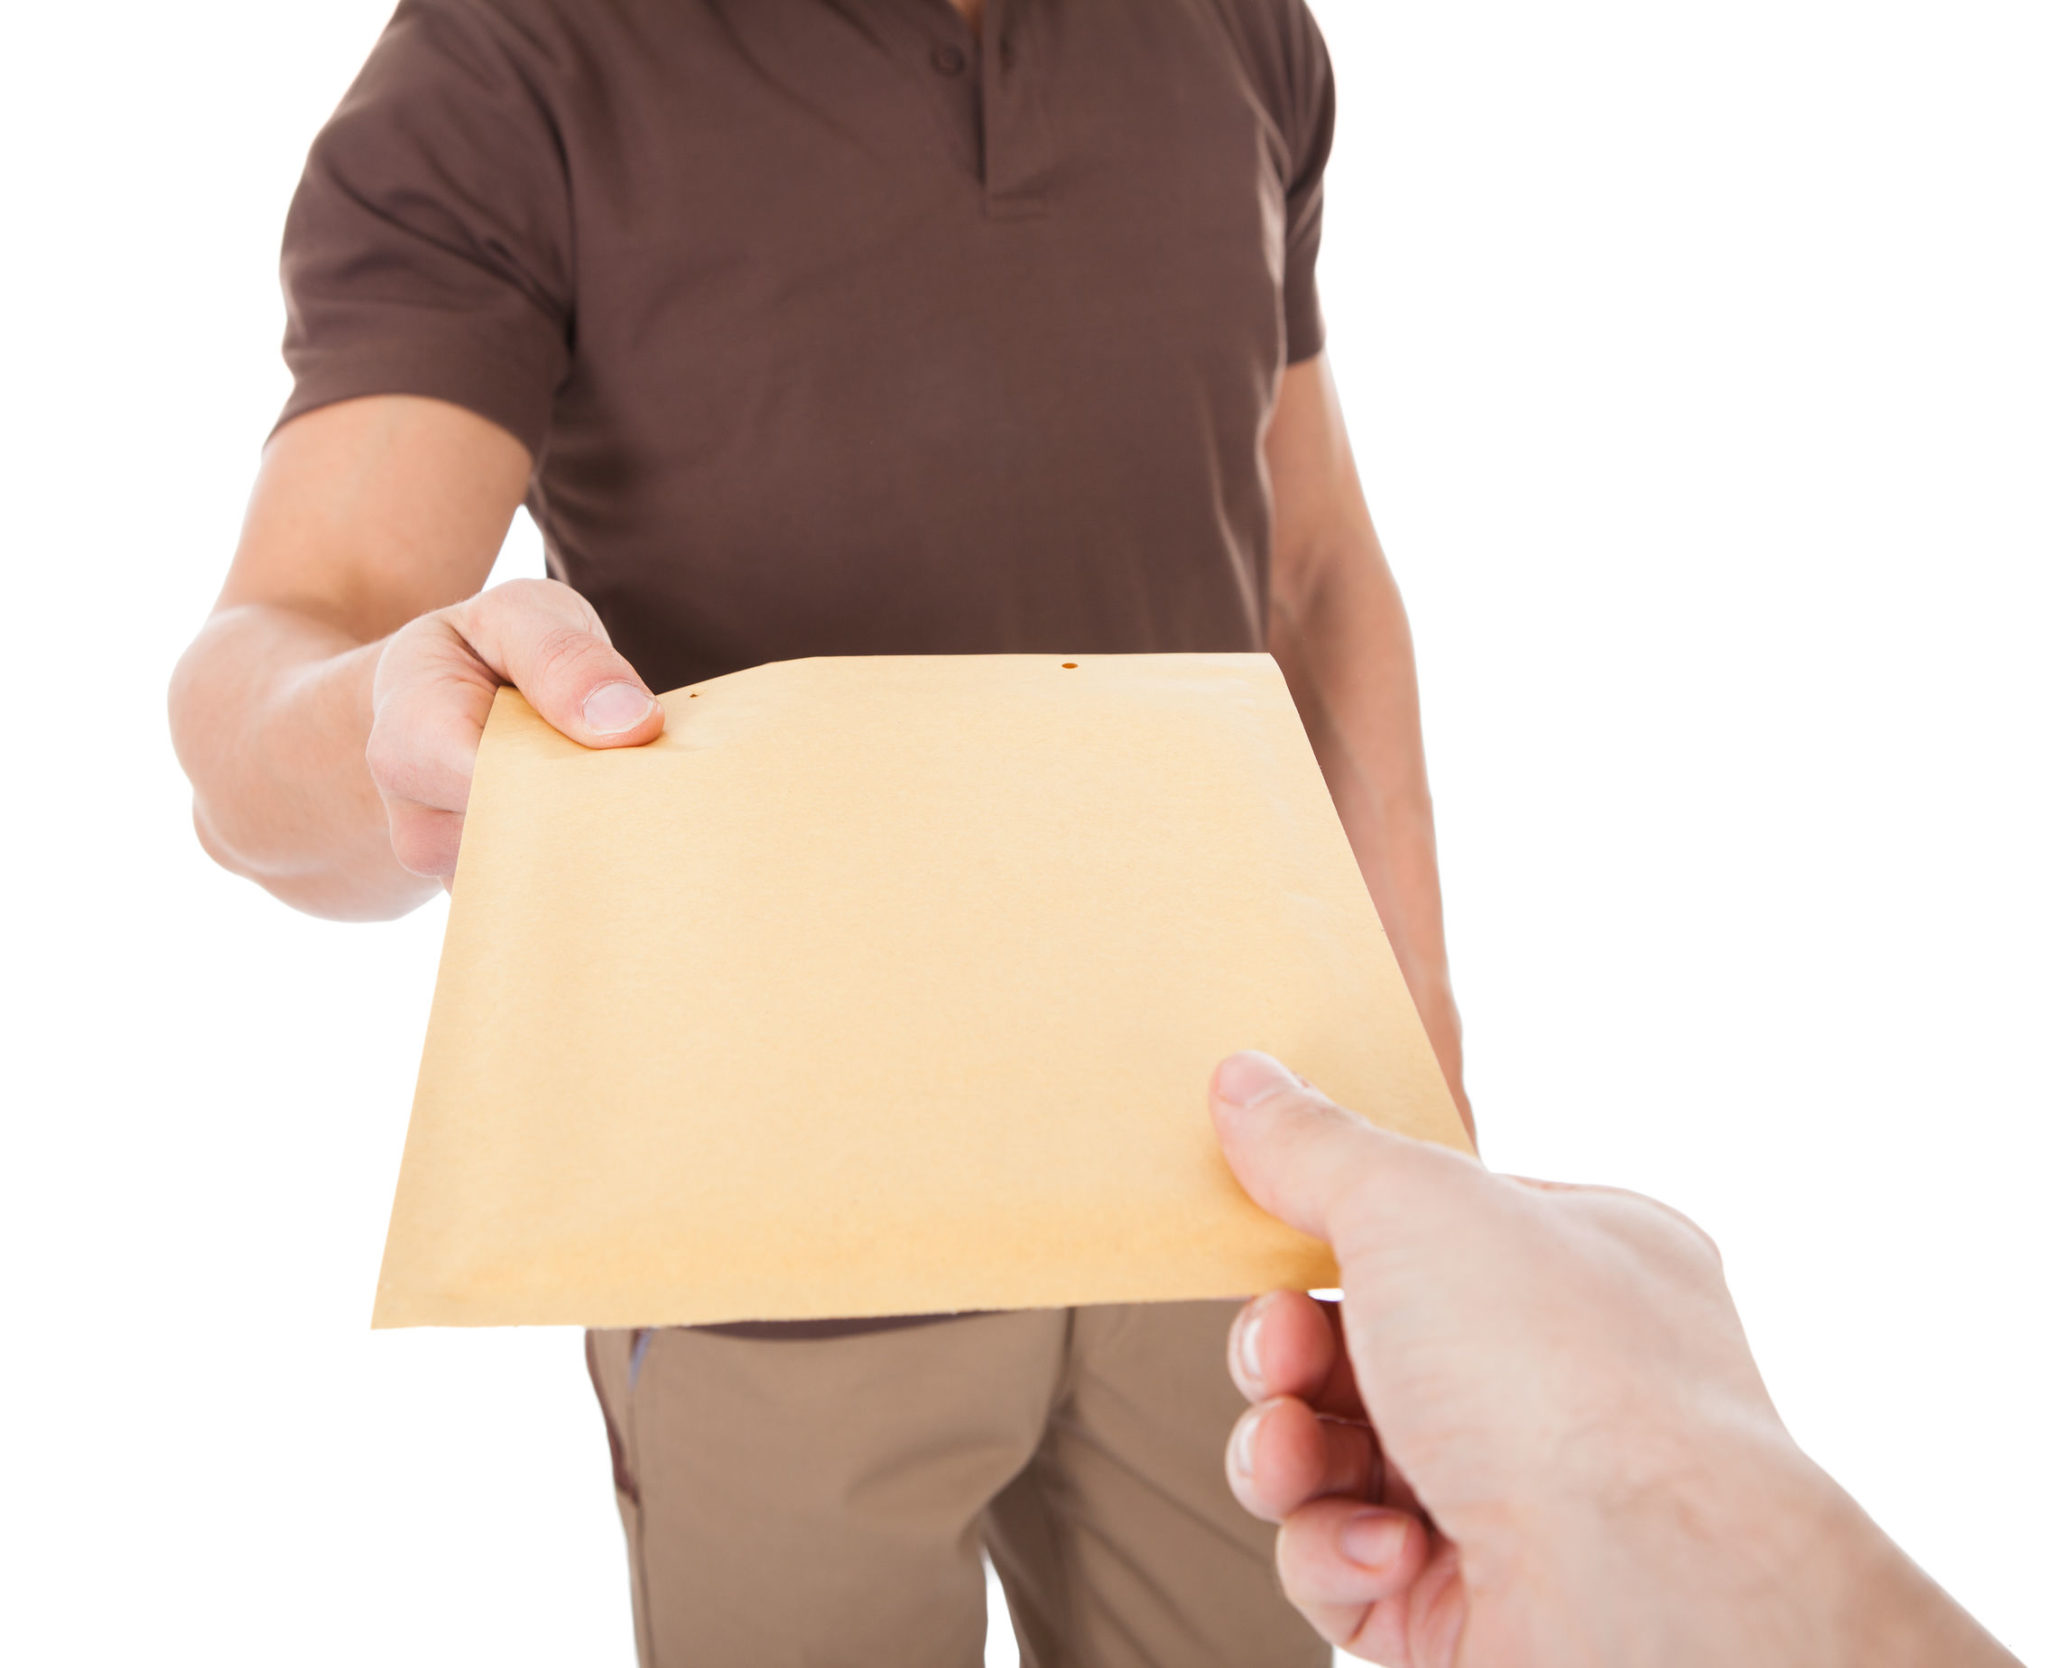 What You Need to Know if Court Papers are Served Incorrectly